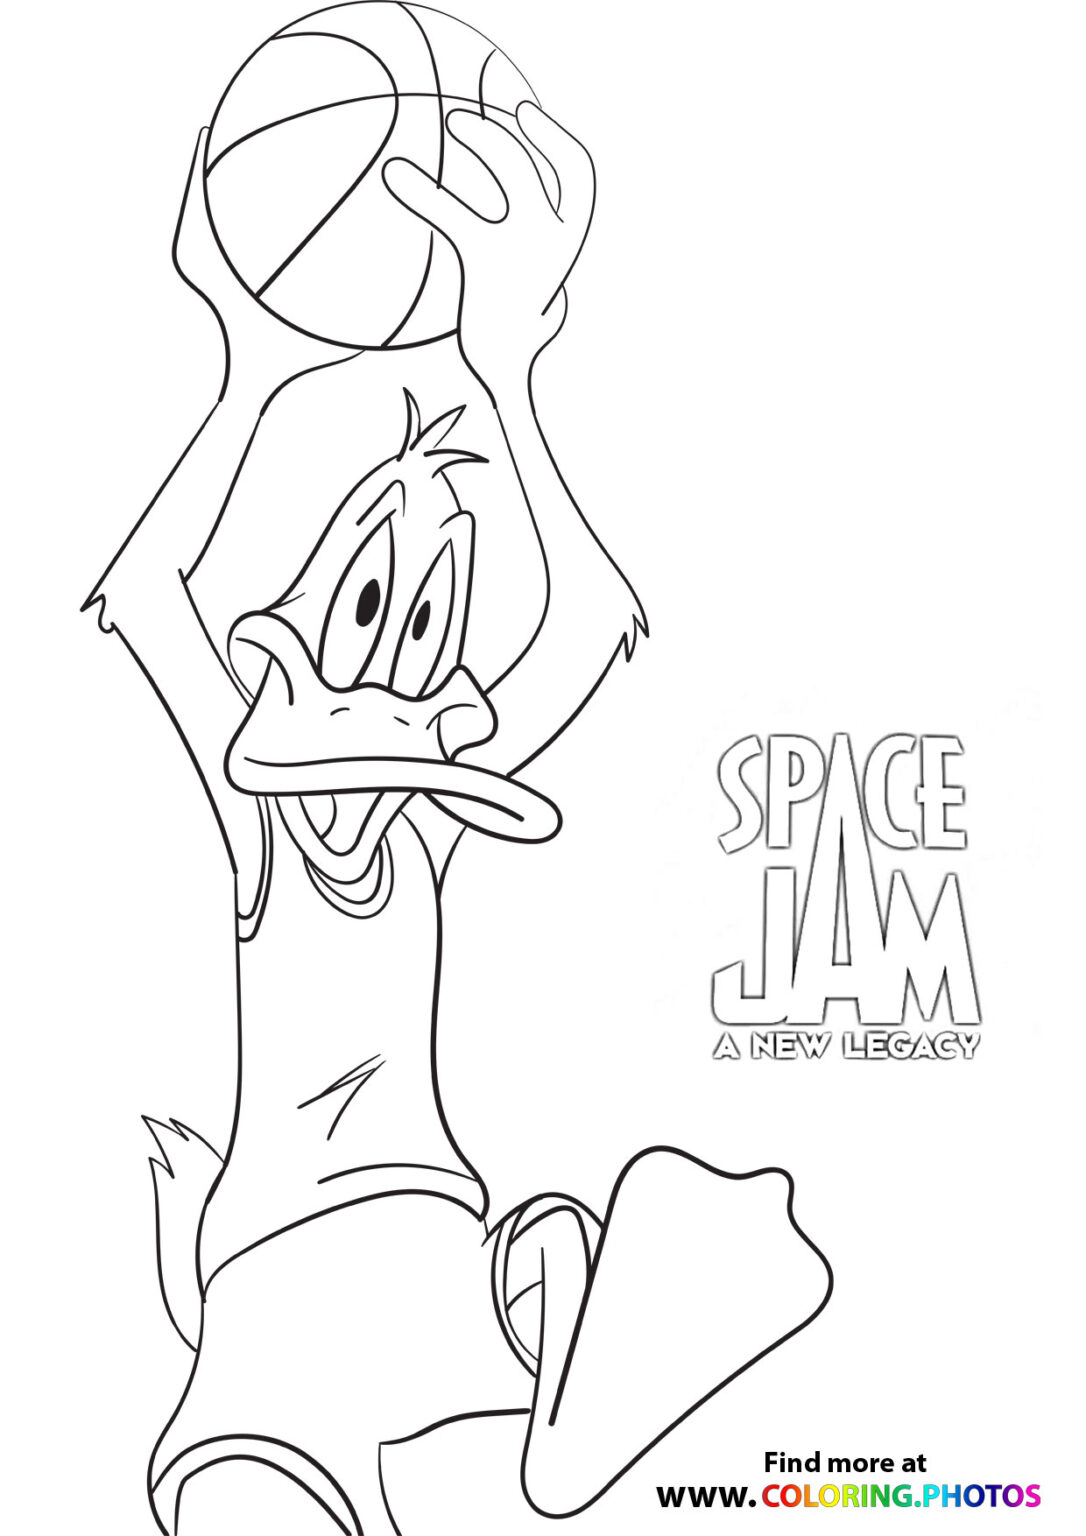 tune-squad-space-jam-coloring-page-free-printable-coloring-pages-for-kids